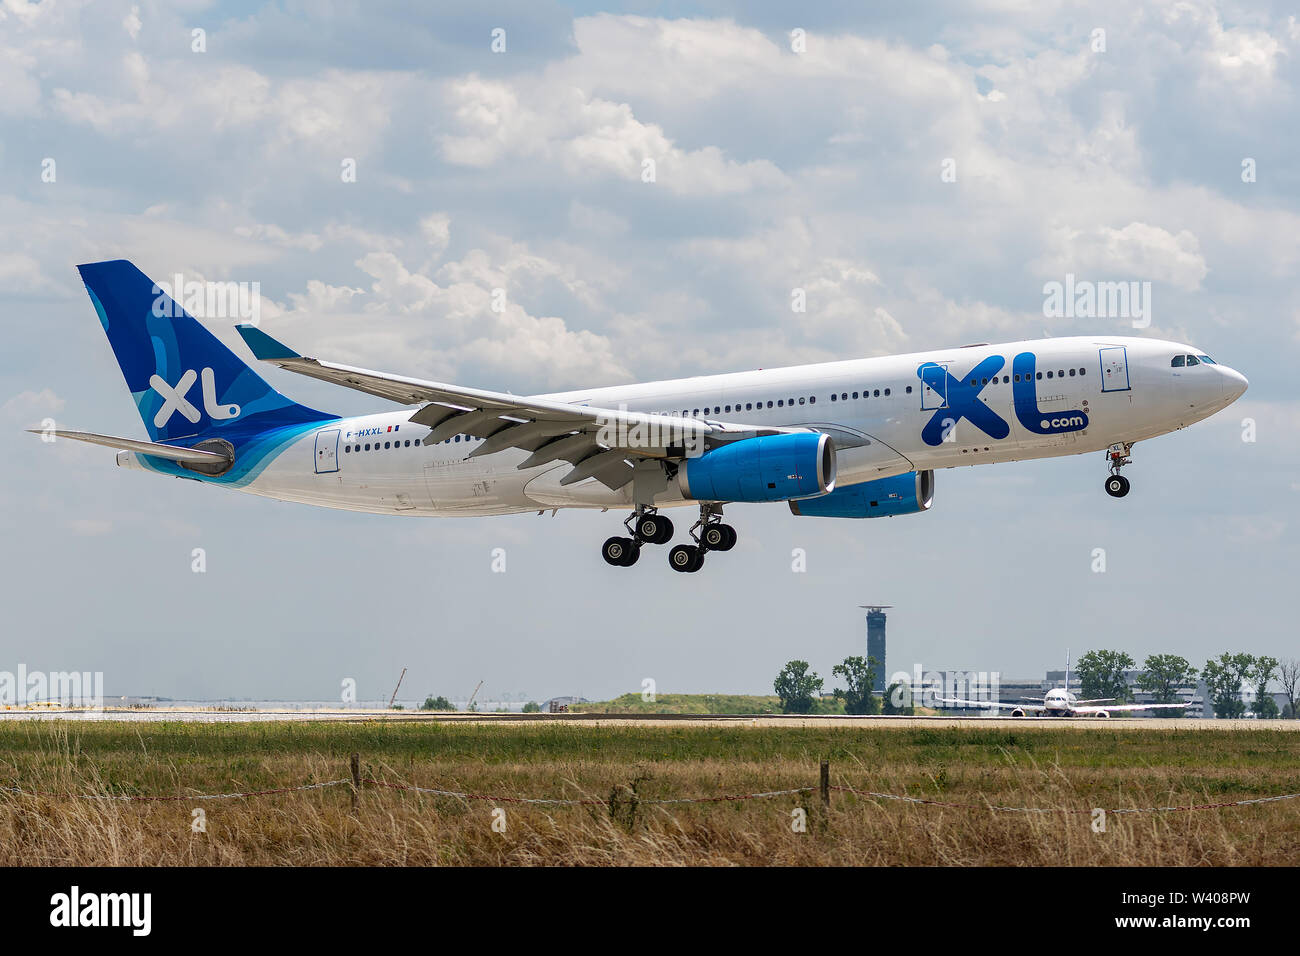 Airbus A330 243 Stock Photos & Airbus A330 243 Stock Images - Alamy